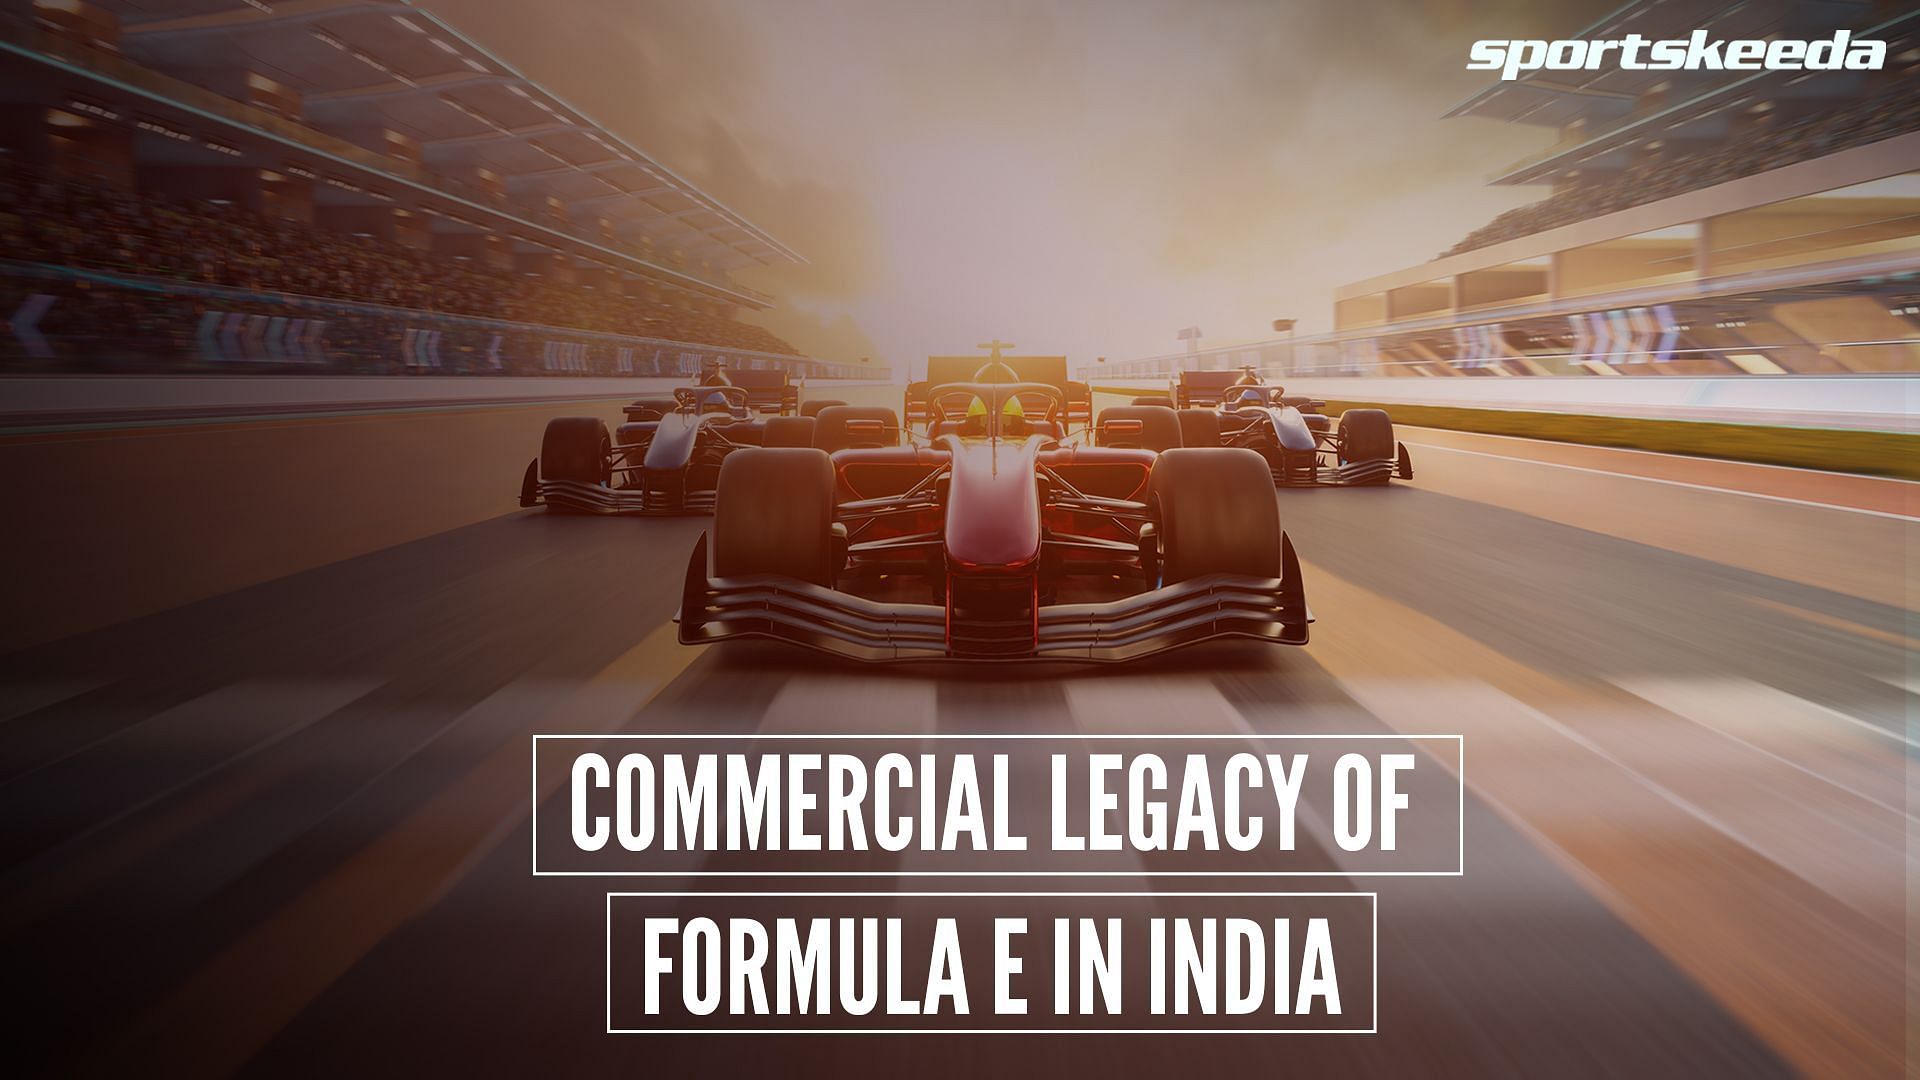 The Formula E might open many commercial doors for sports in India. 